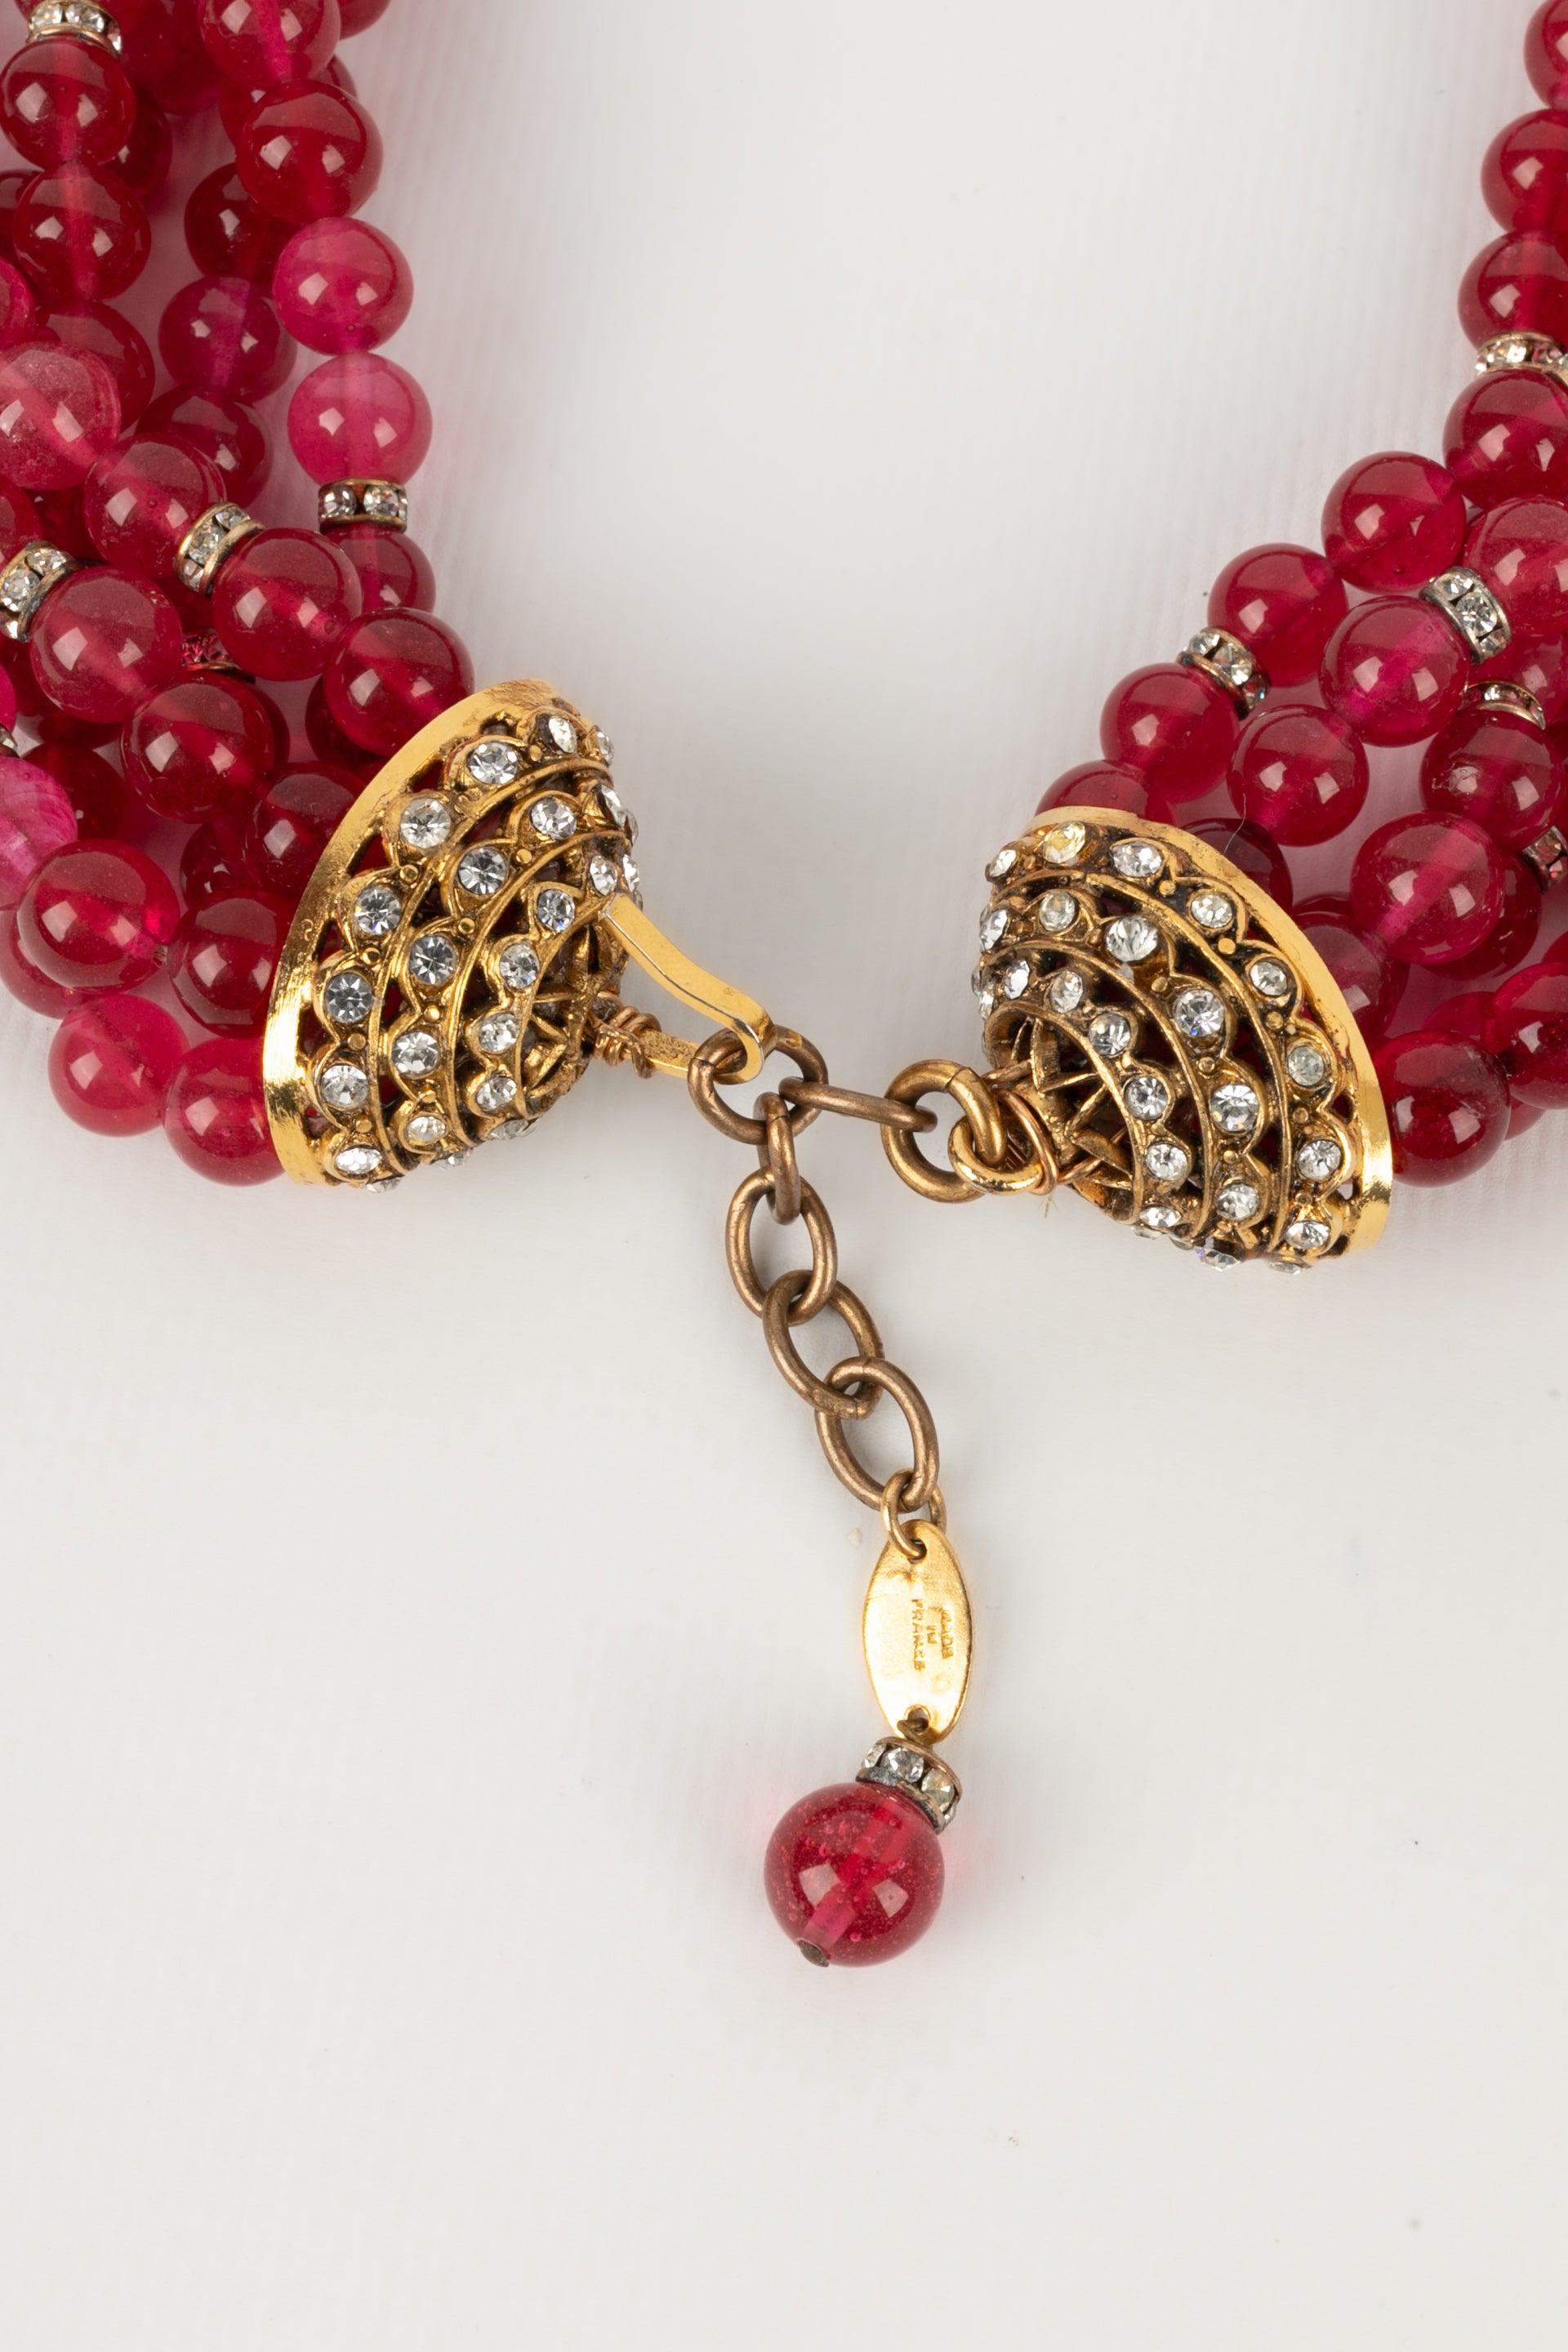 Chanel Golden Metal Short Necklace with Rhinestones and Glass Pearls, 1983 For Sale 2